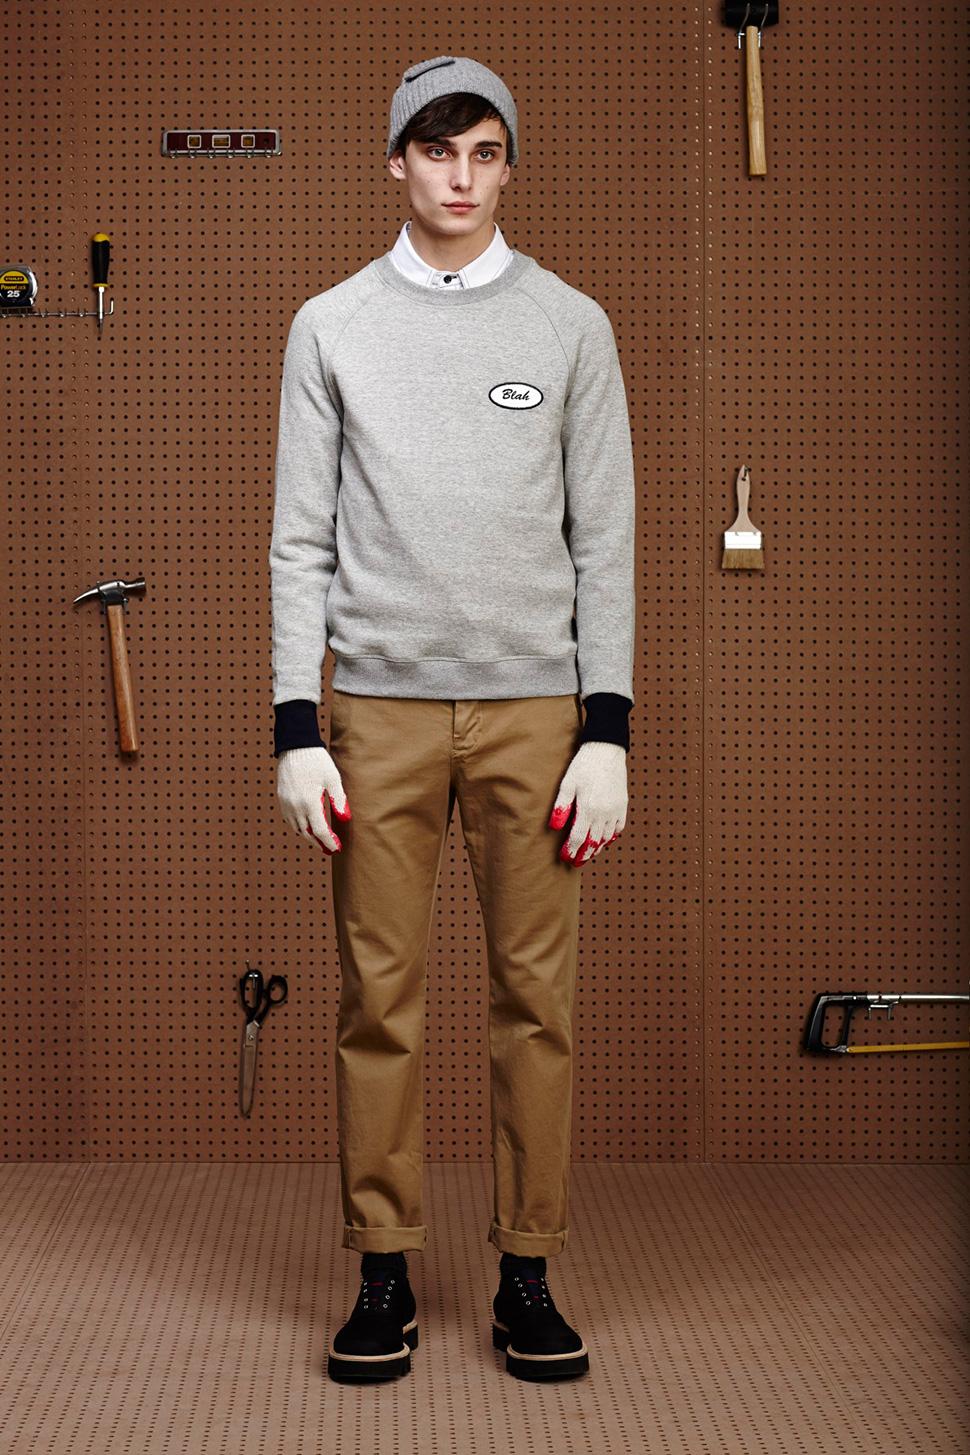 BAND OF OUTSIDERS – F/W 2015 COLLECTION LOOKBOOK